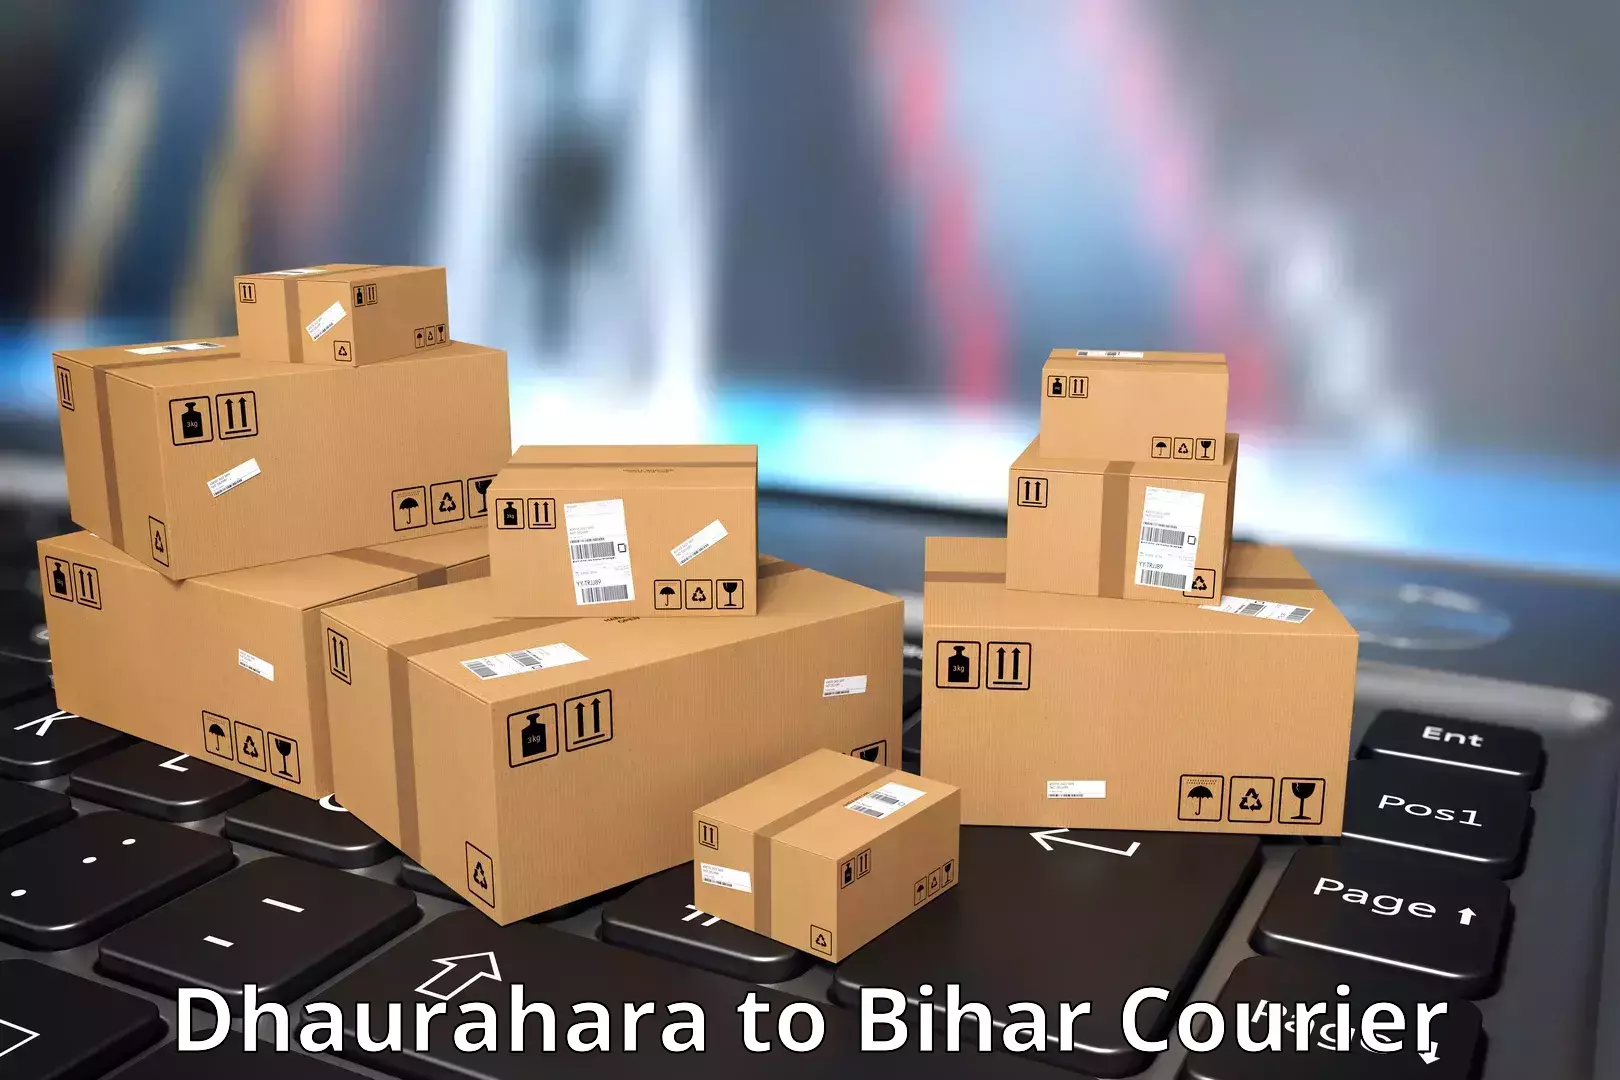 Multi-national courier services Dhaurahara to Khodaganj